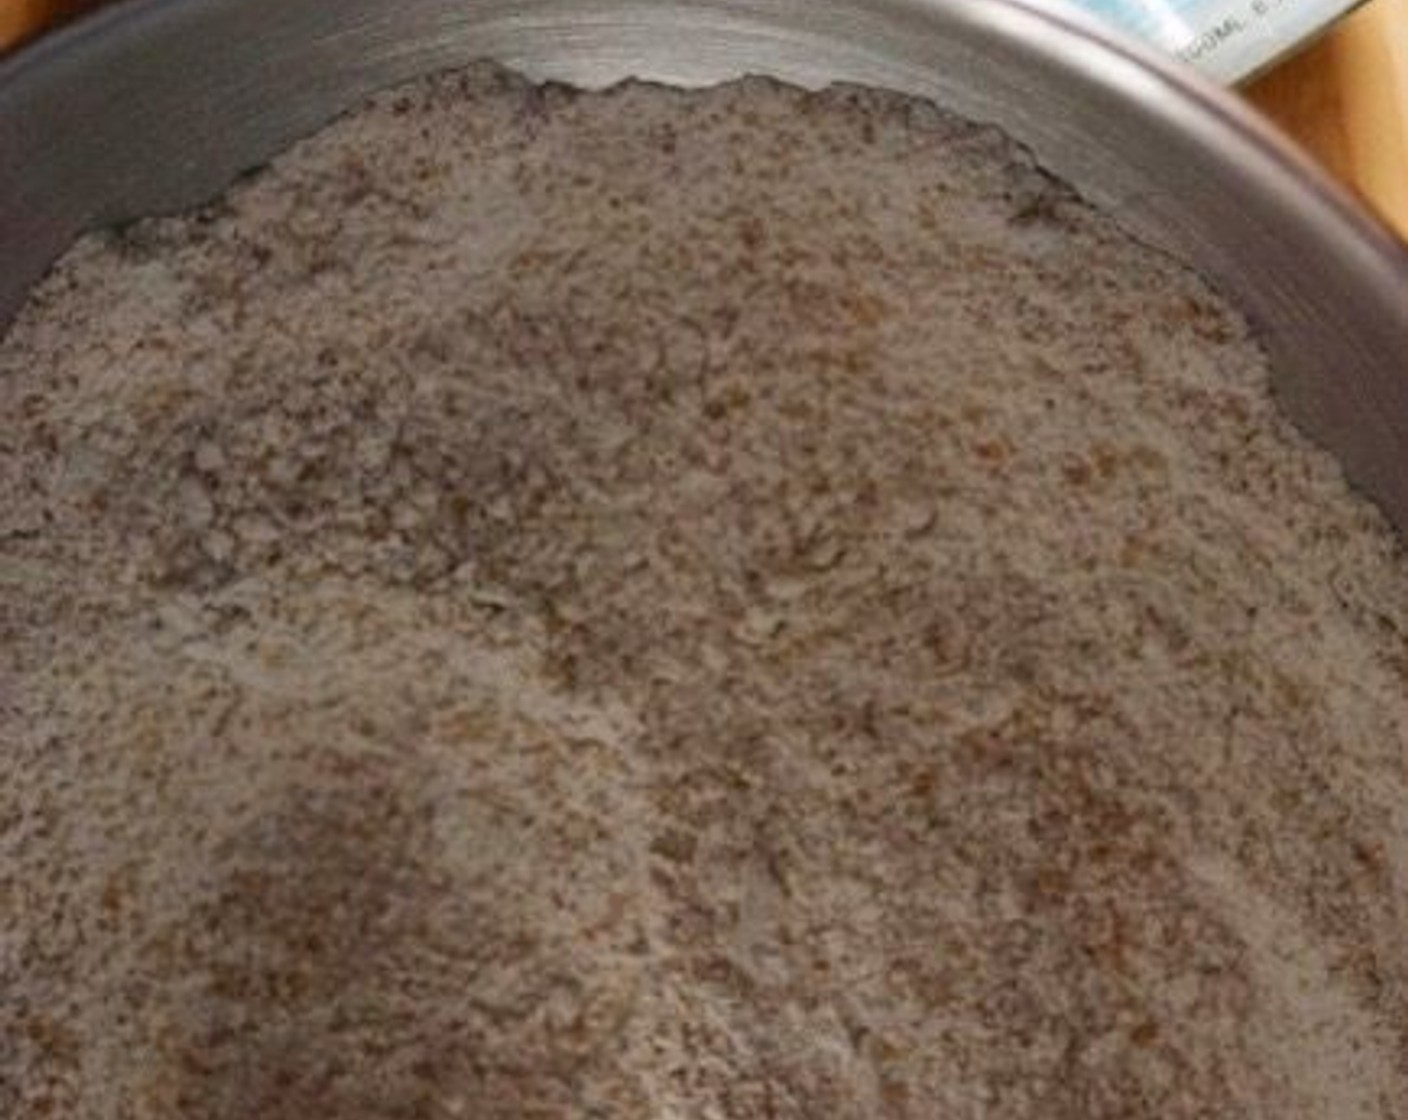 step 2 In a bowl, combine Oat Flour (1 cup), Coconut Sugar (1/2 cup), and Baking Powder (1 Tbsp). Stir to combine.